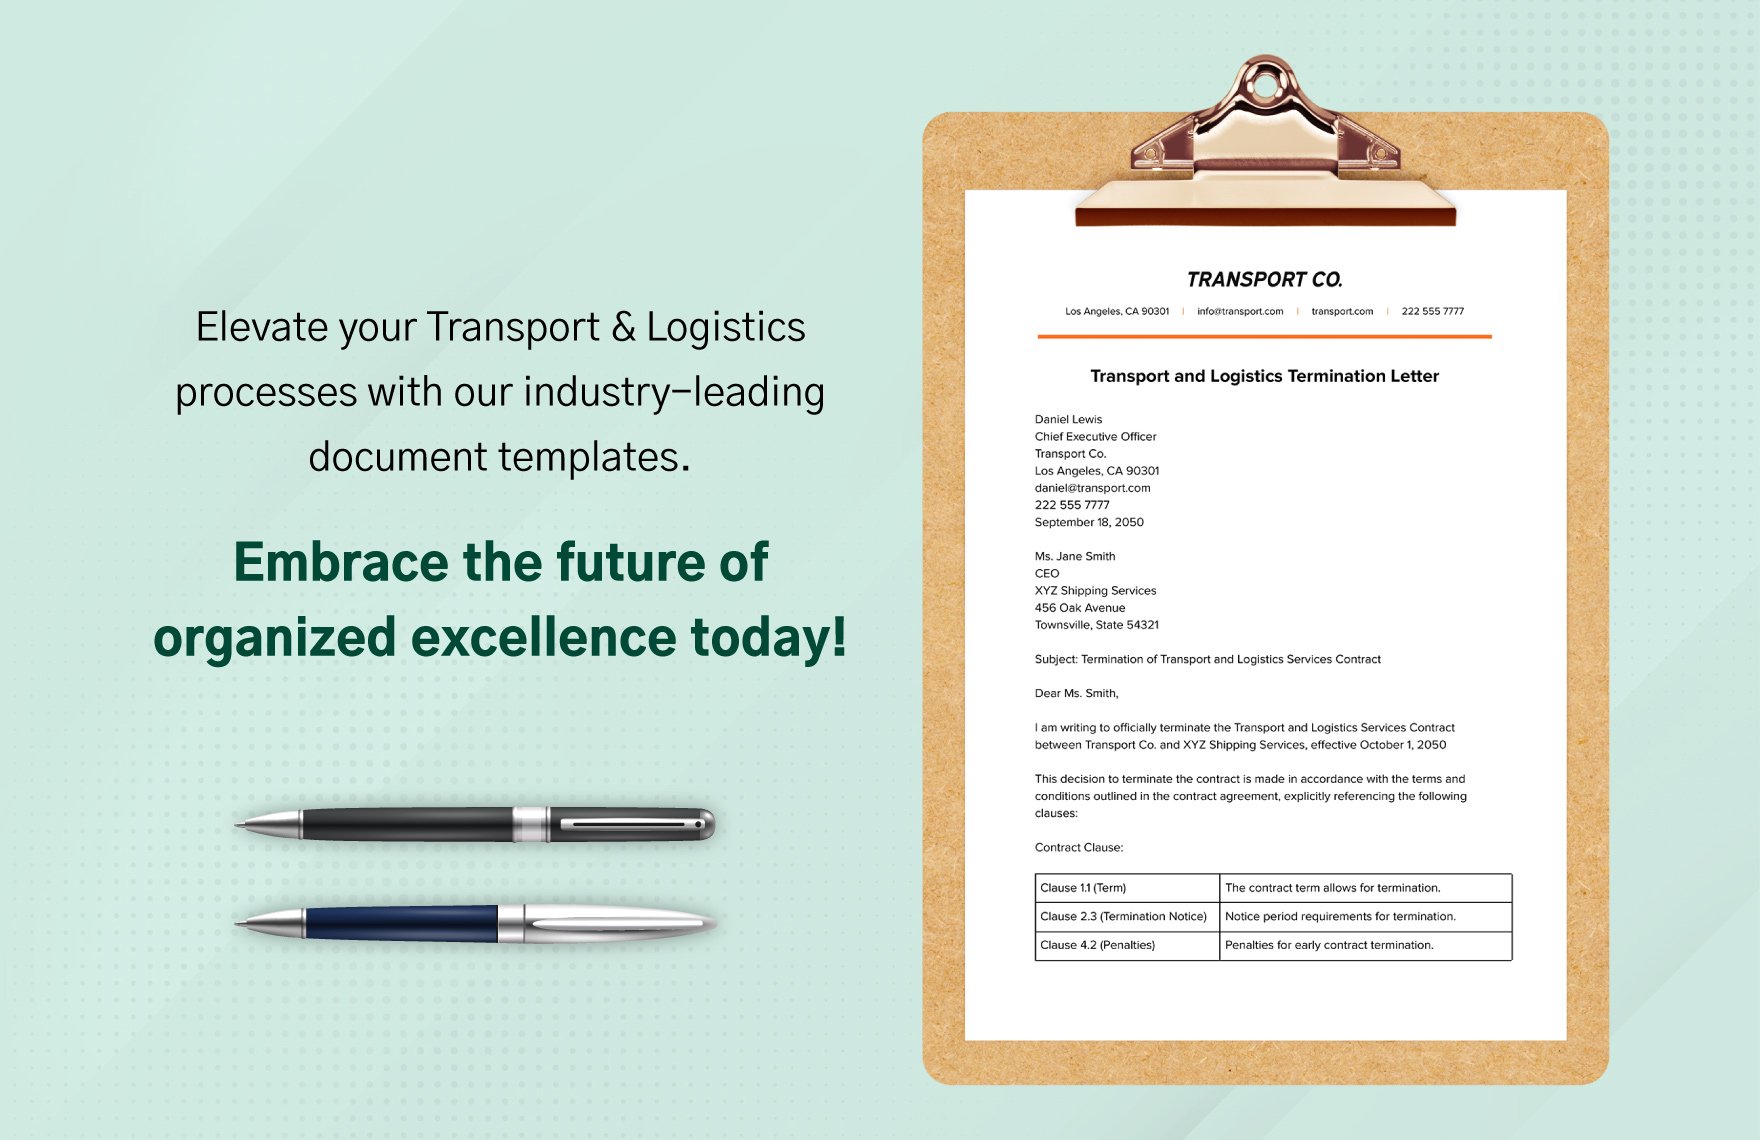 Transport and Logistics Termination Letter Template